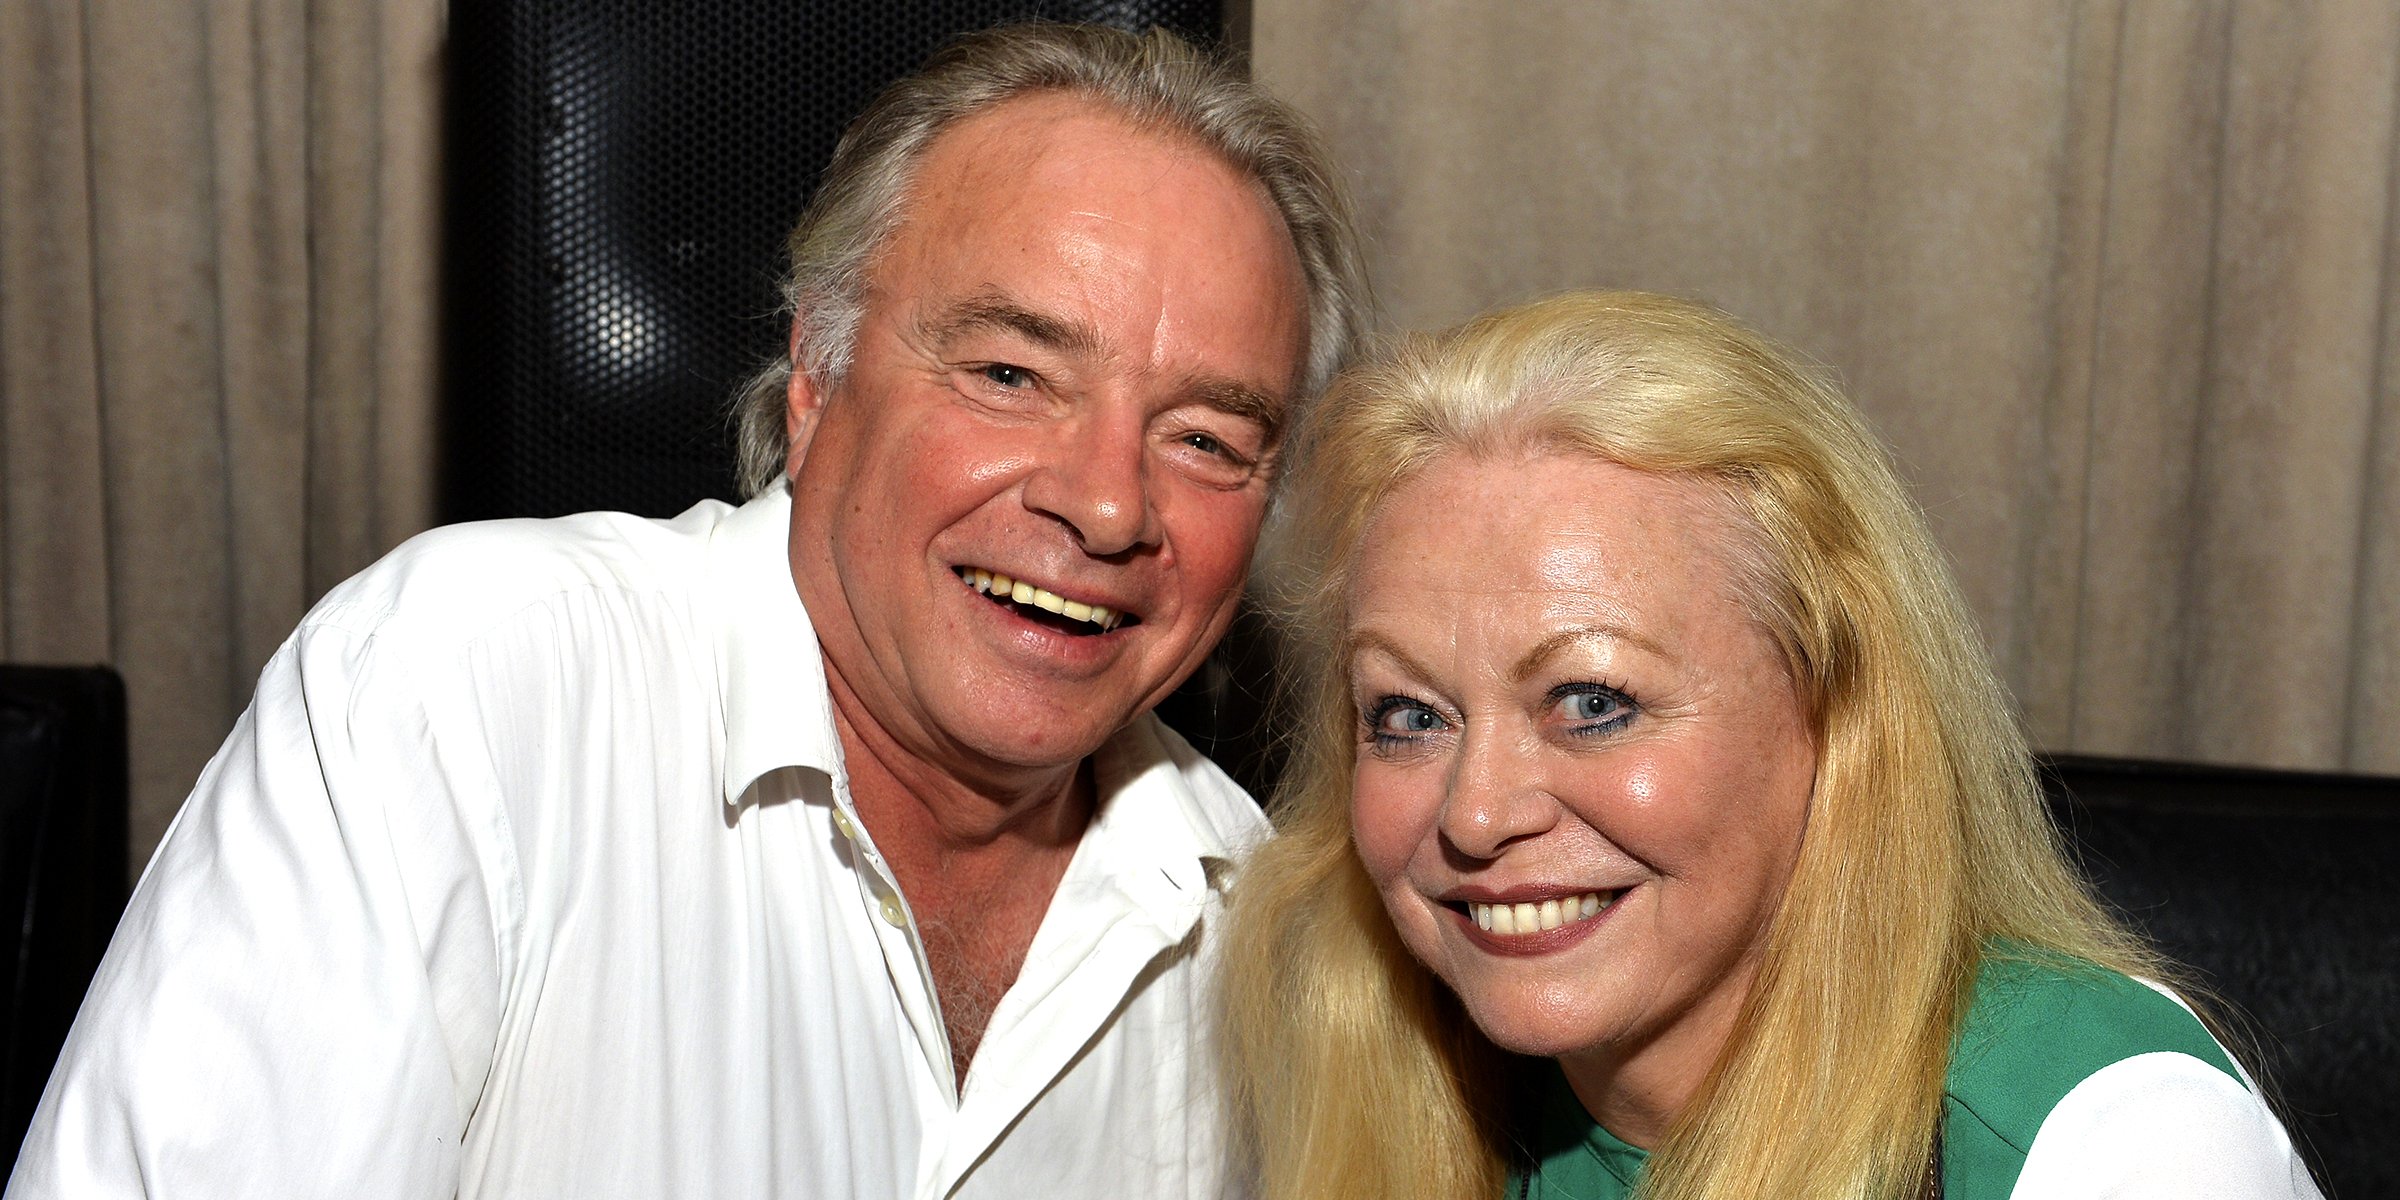 Sean Taylor and Jacki Weaver Smile for a Photo | Source: Getty Images